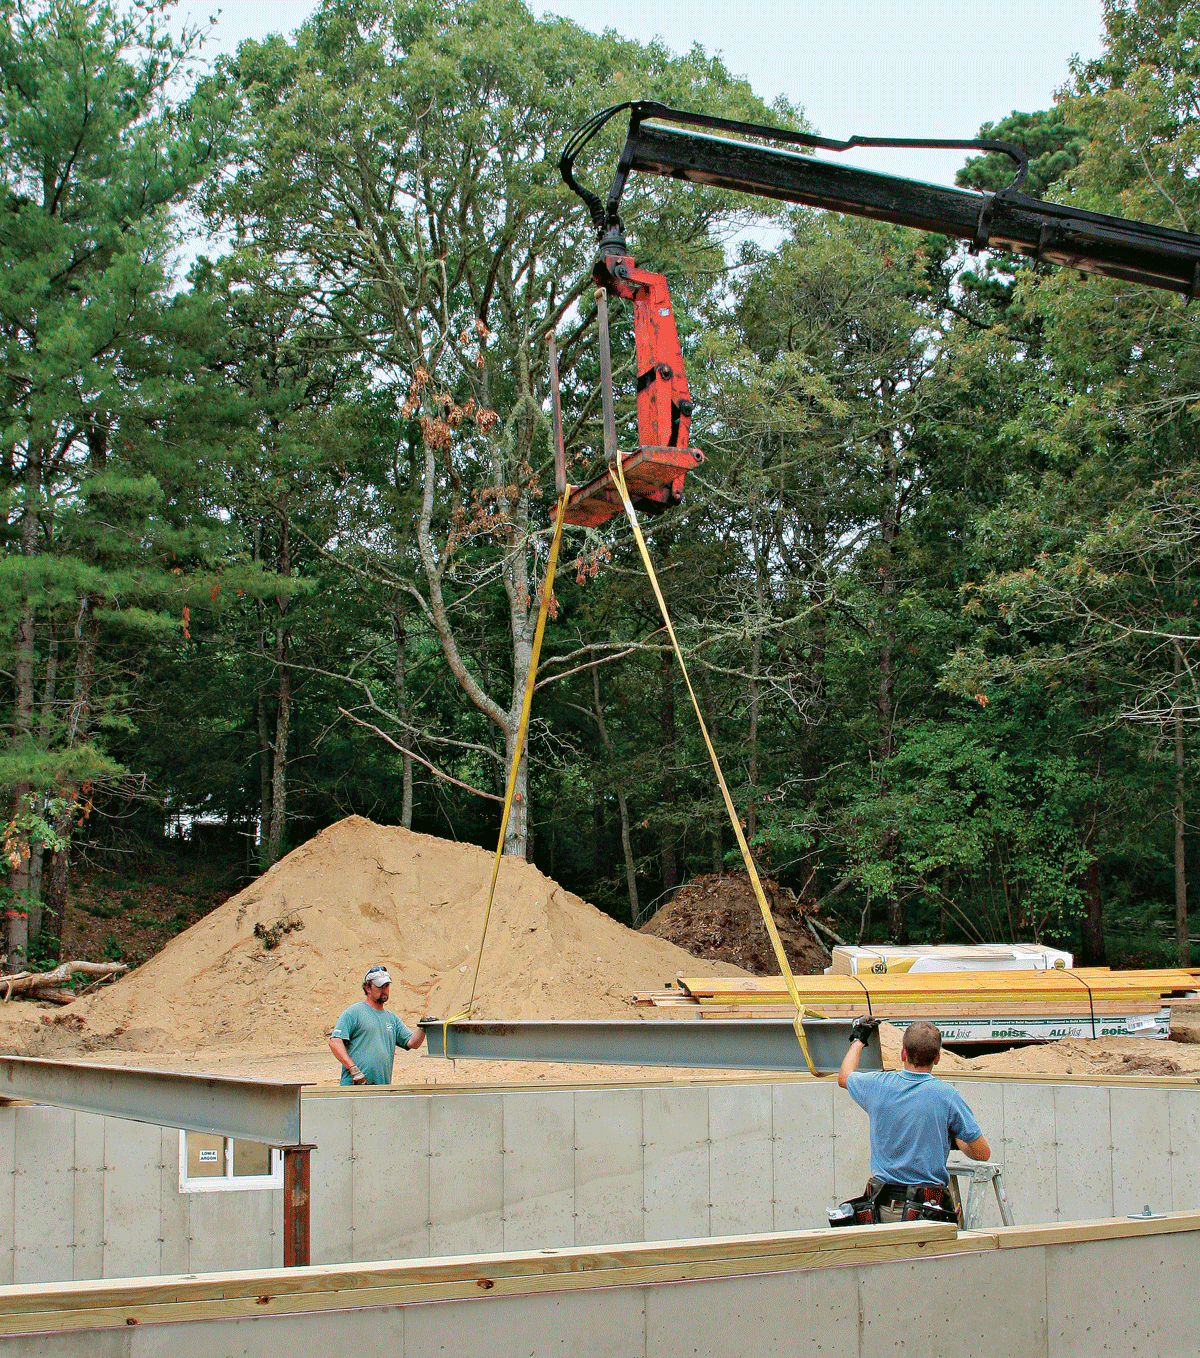 A steel beam can span greater distances than wood, but you’ll definitely need a crane to get it into place.